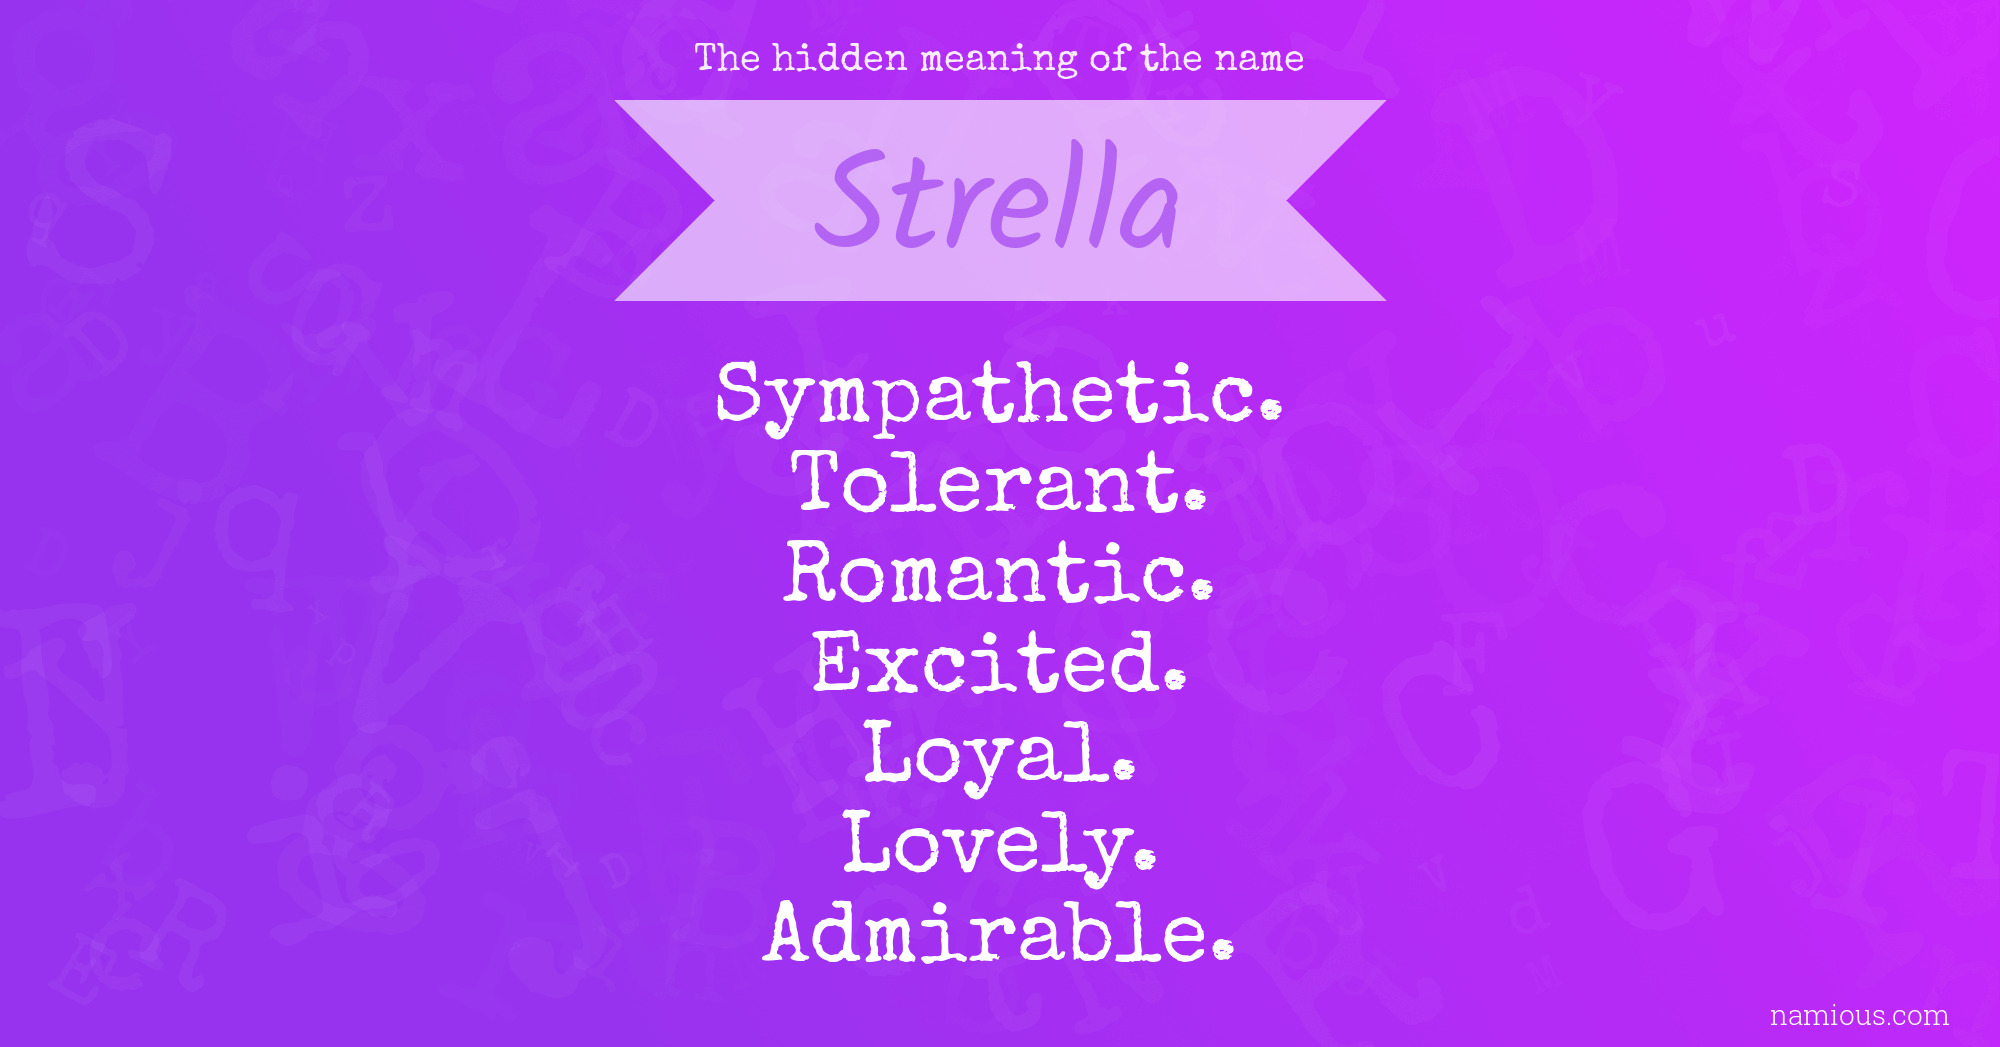 The hidden meaning of the name Strella